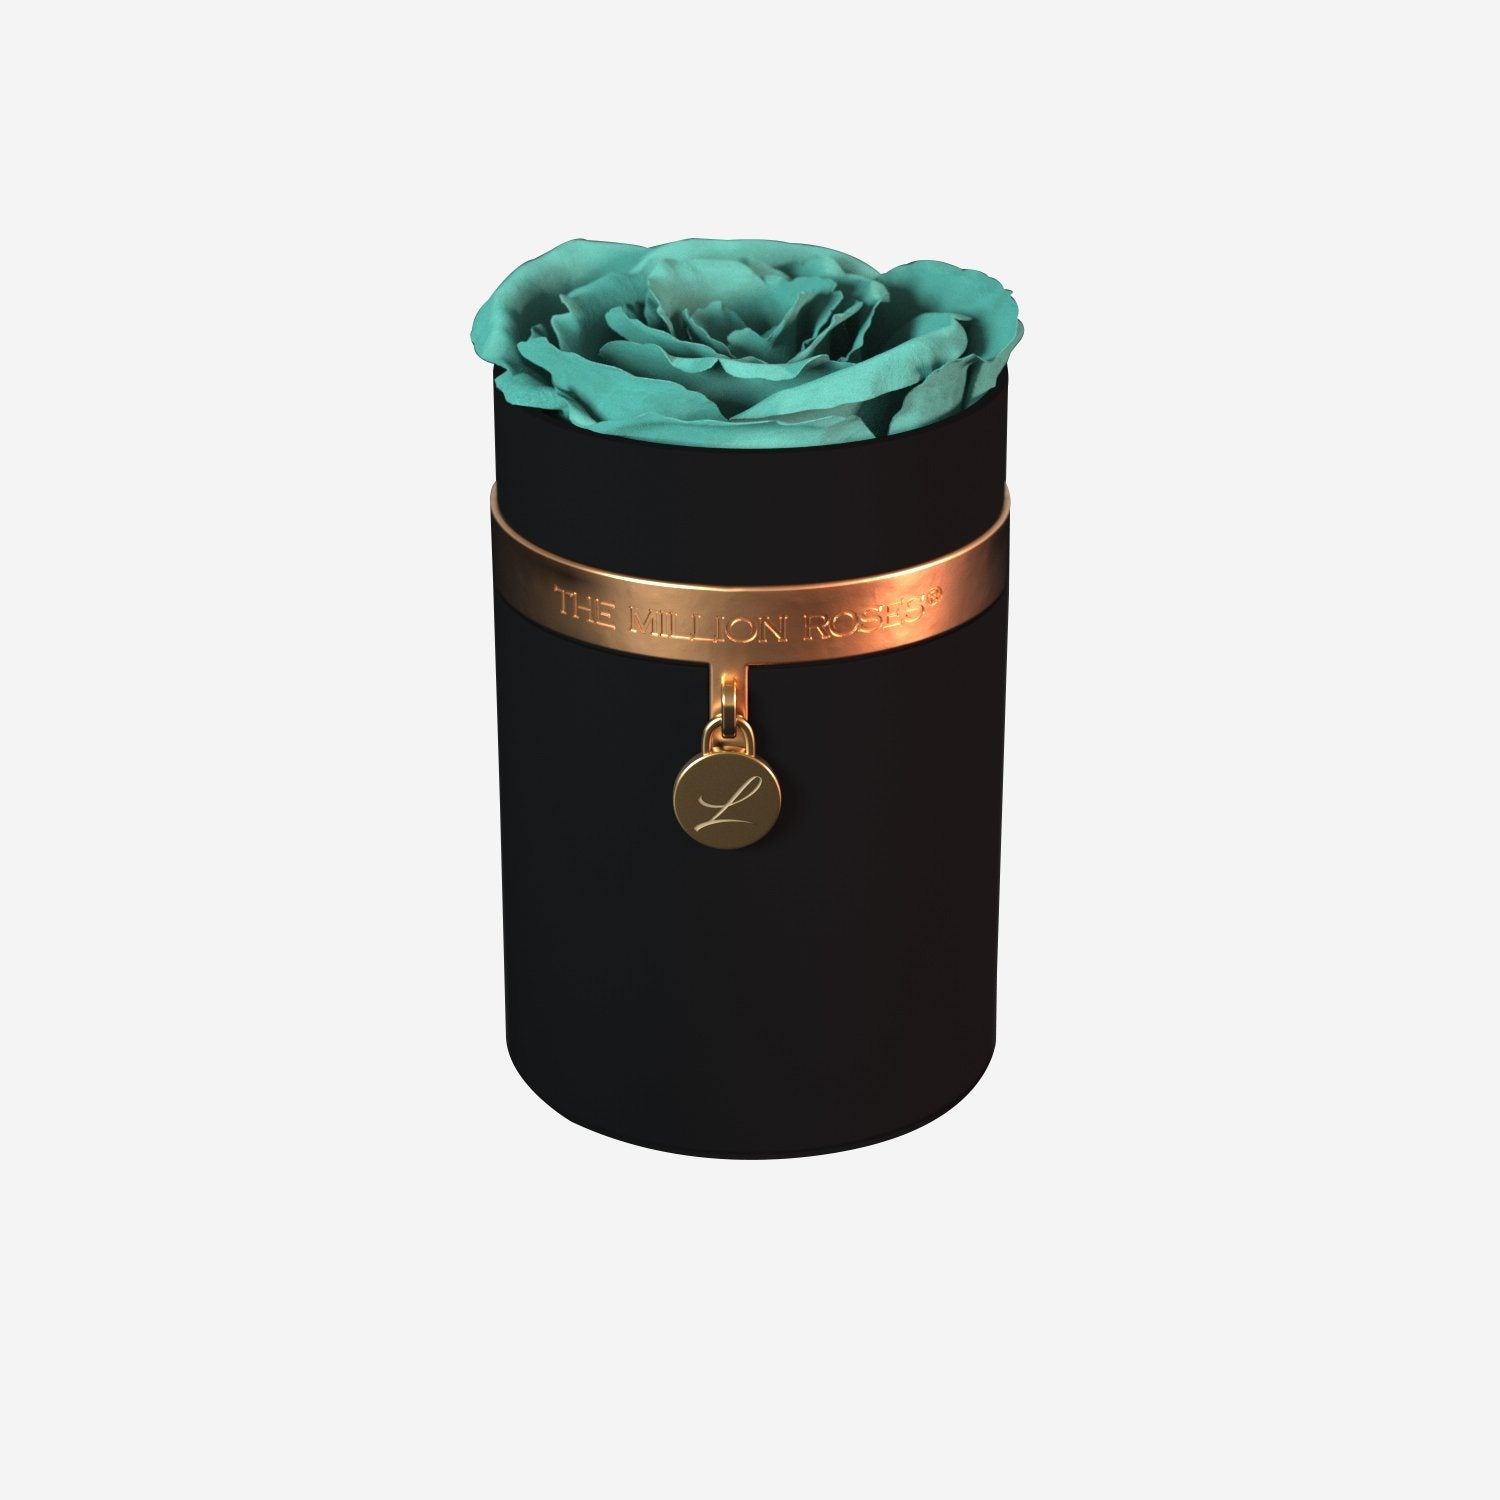 One in a Million™ Round Black Box | Charm Edition | Turquoise Rose - The Million Roses